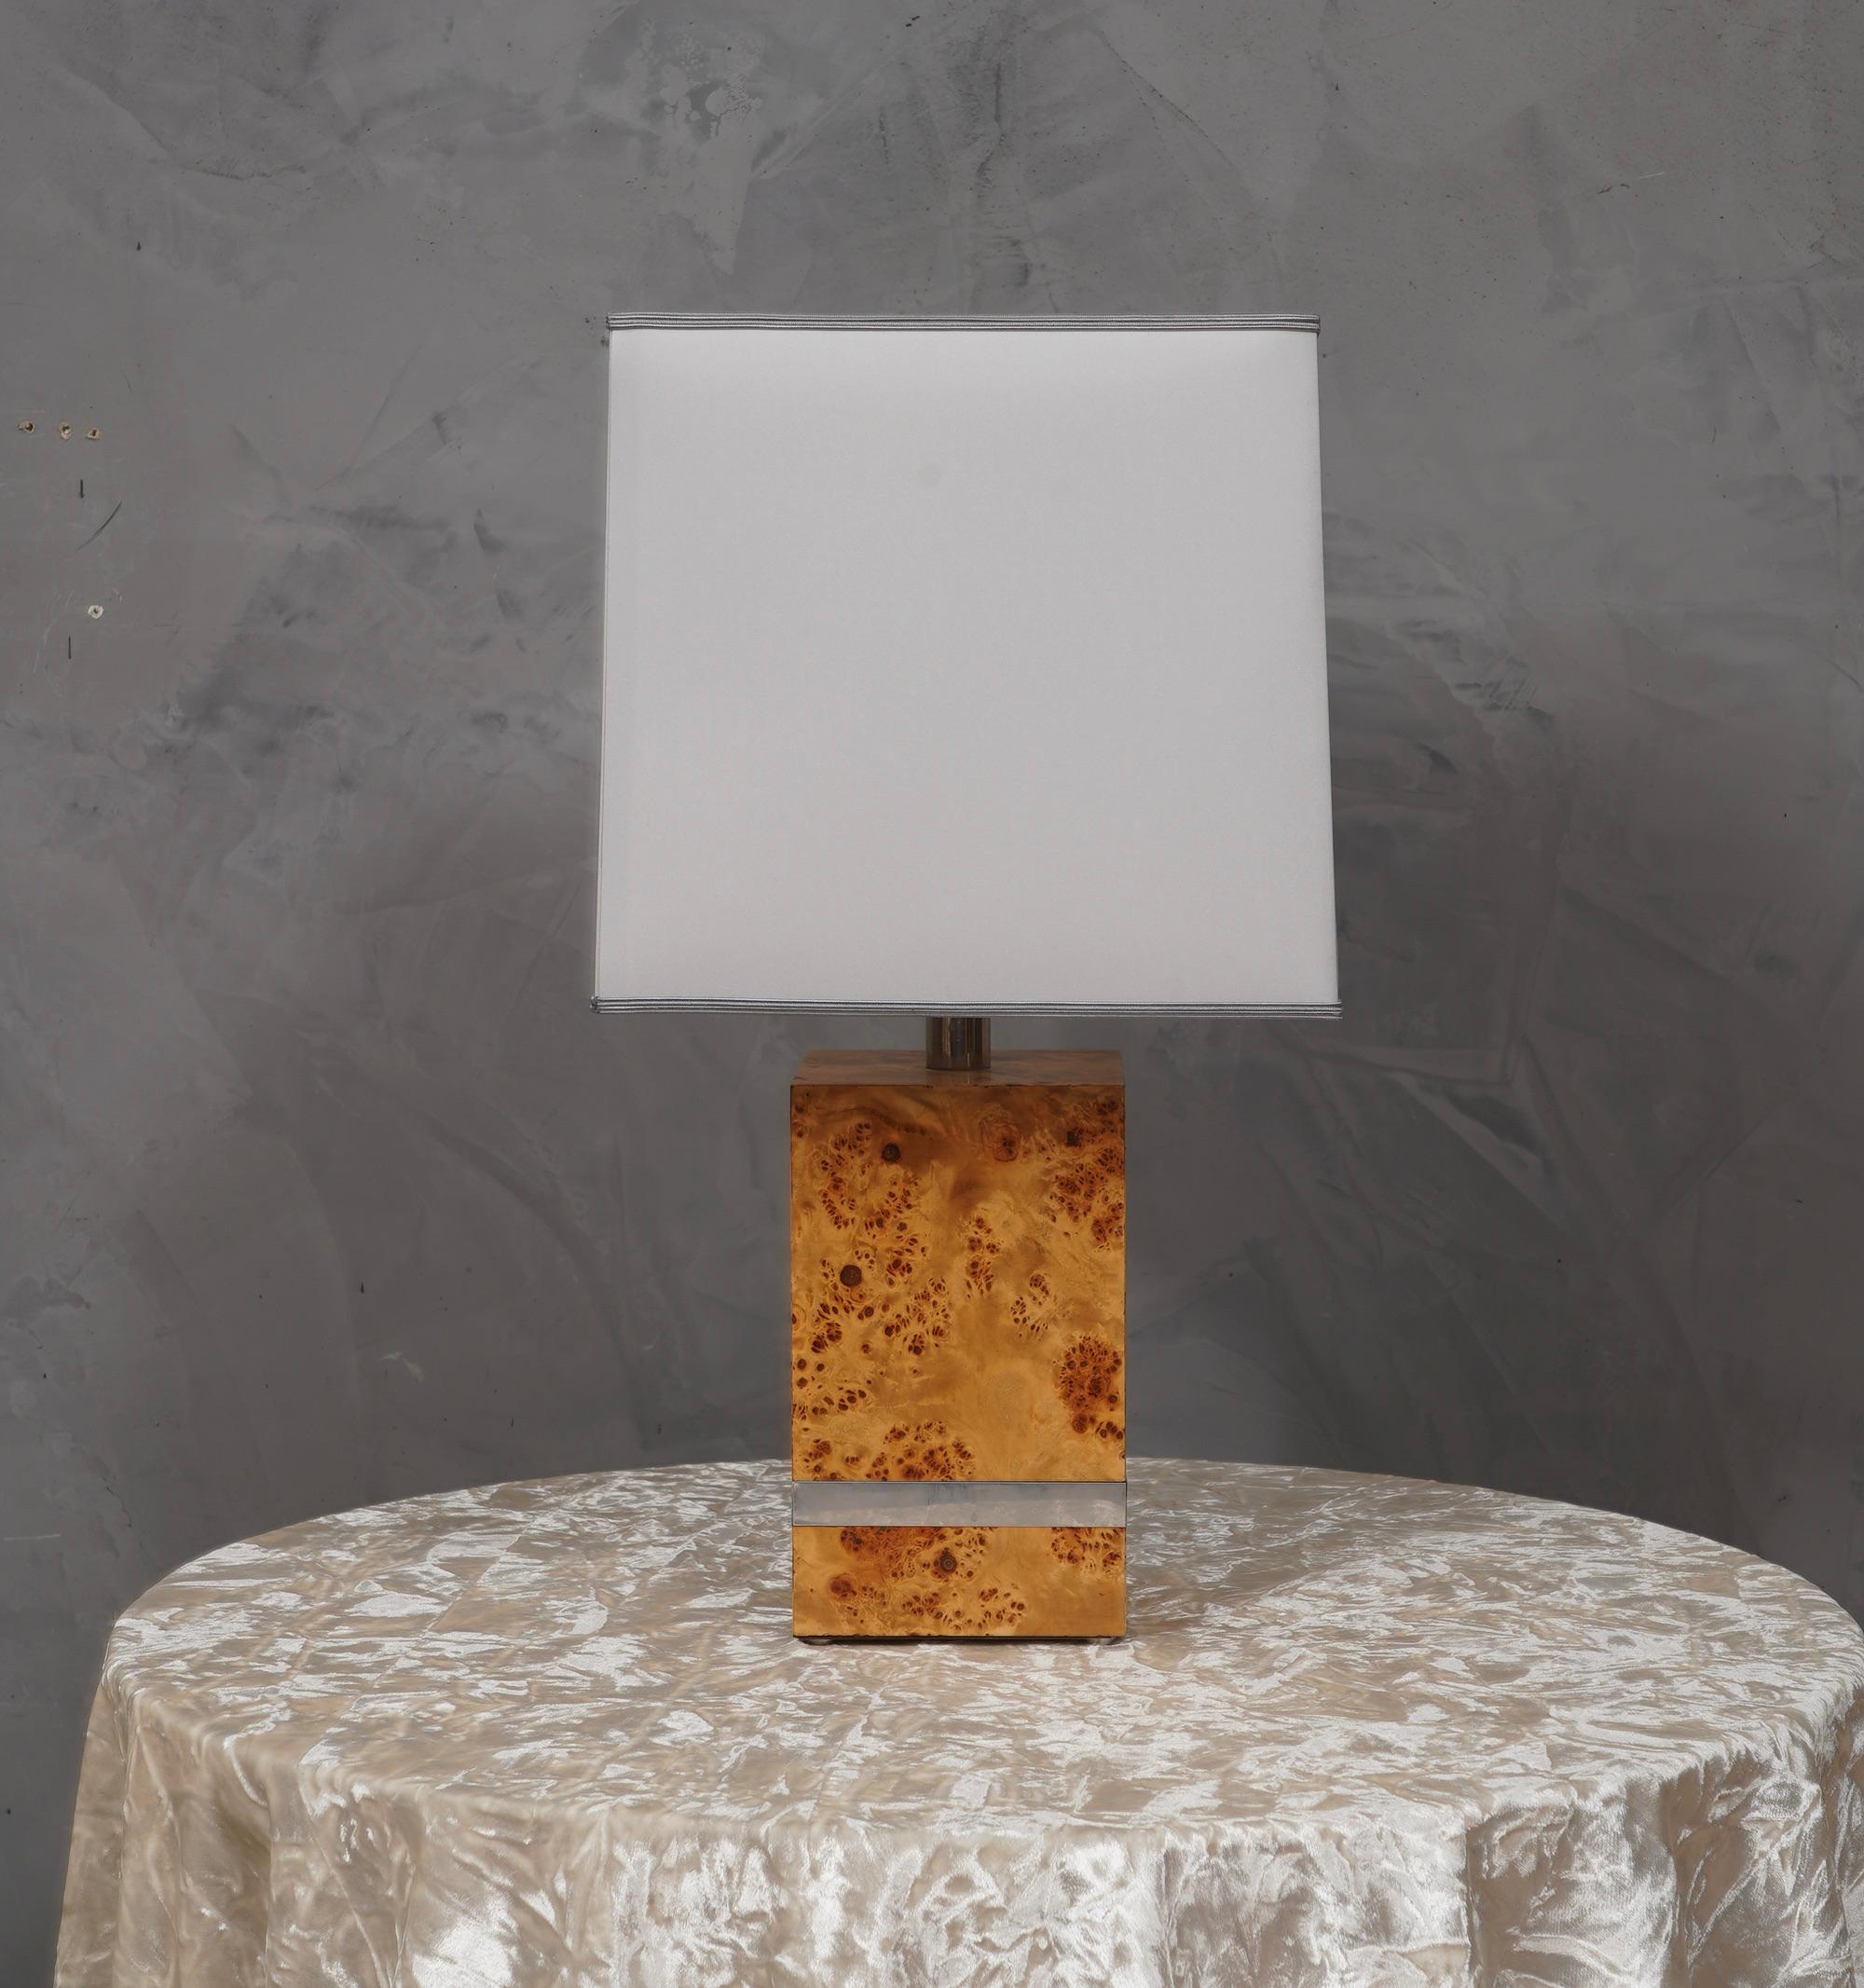 Refined and particular table lamp by Tommaso Barbi, clean in its style, the table lamp is full of precious and distinctive materials.

The table lamp has a square shape and is made of poplar veneered wood. in the lower part of the base a satin